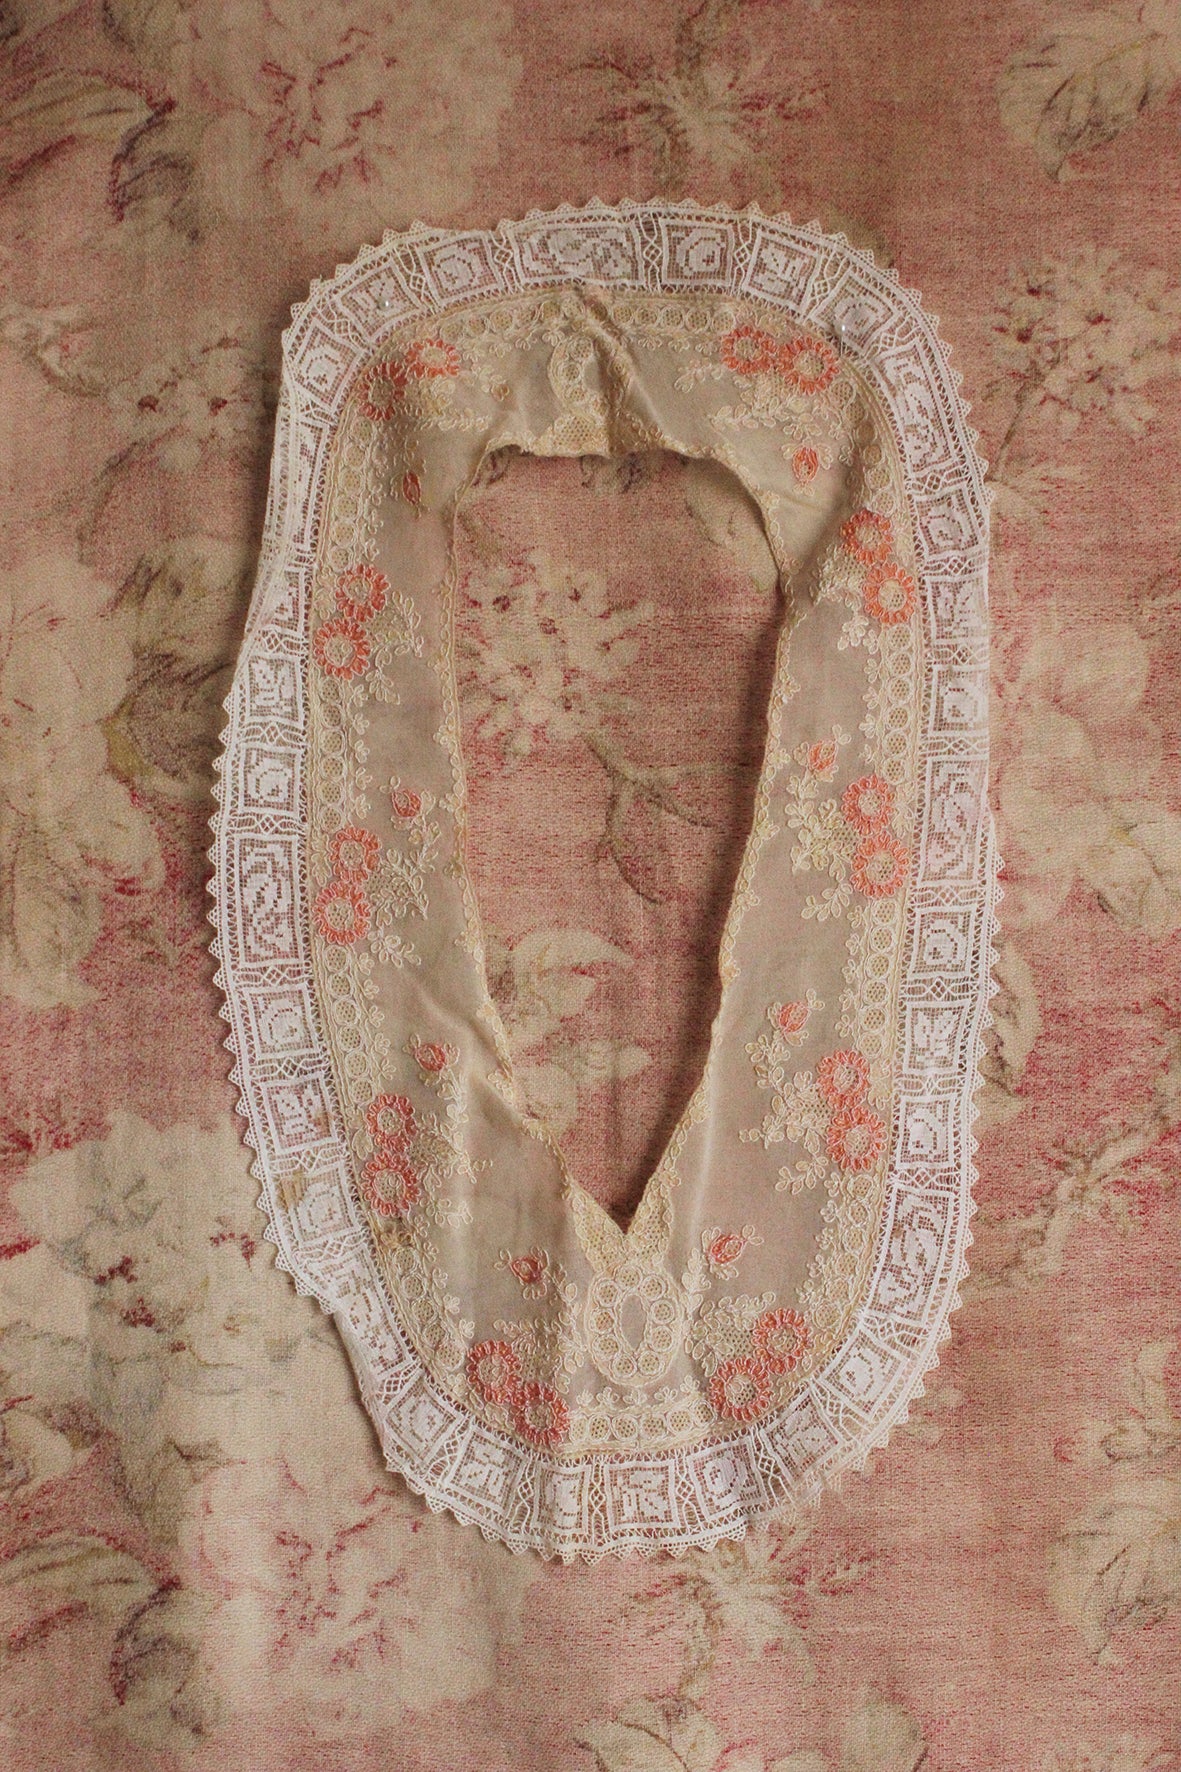 Reclaimed Orange Cream Embroidered Lace Dress Detailing